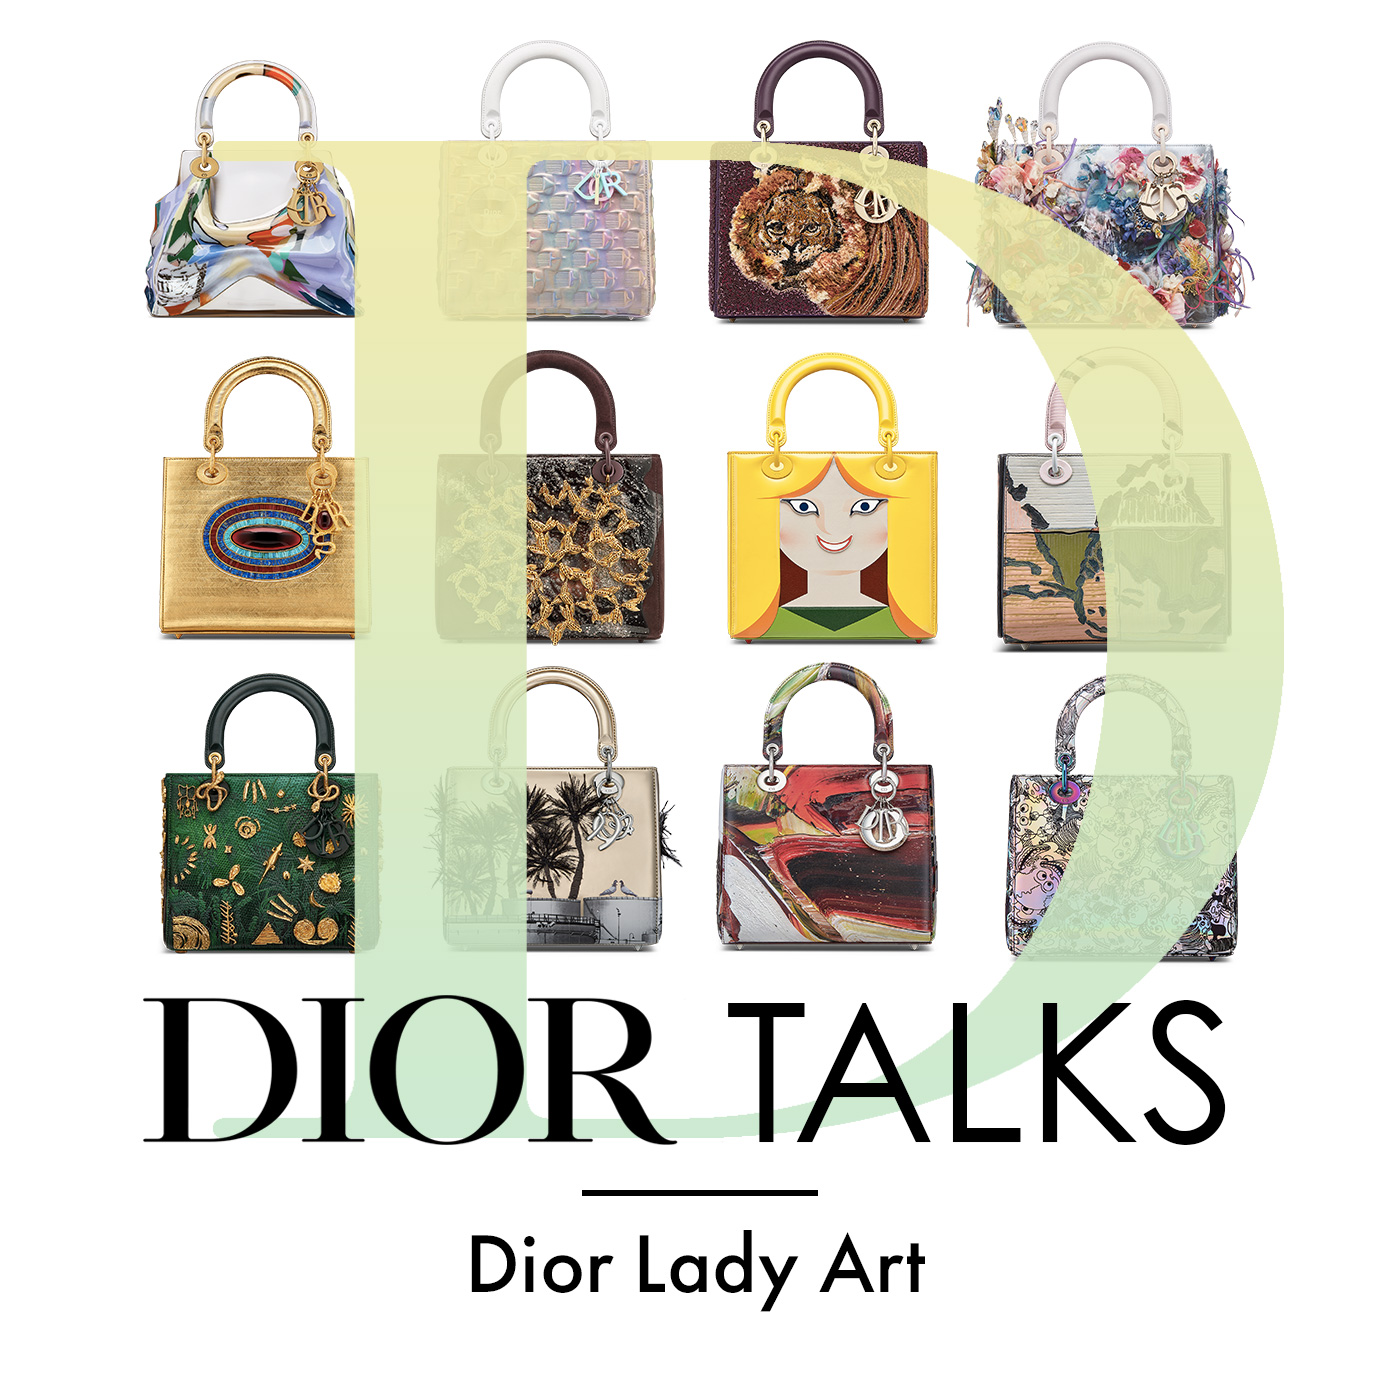 The Dior Lady Art project returns for a 7th edition  RUSSH